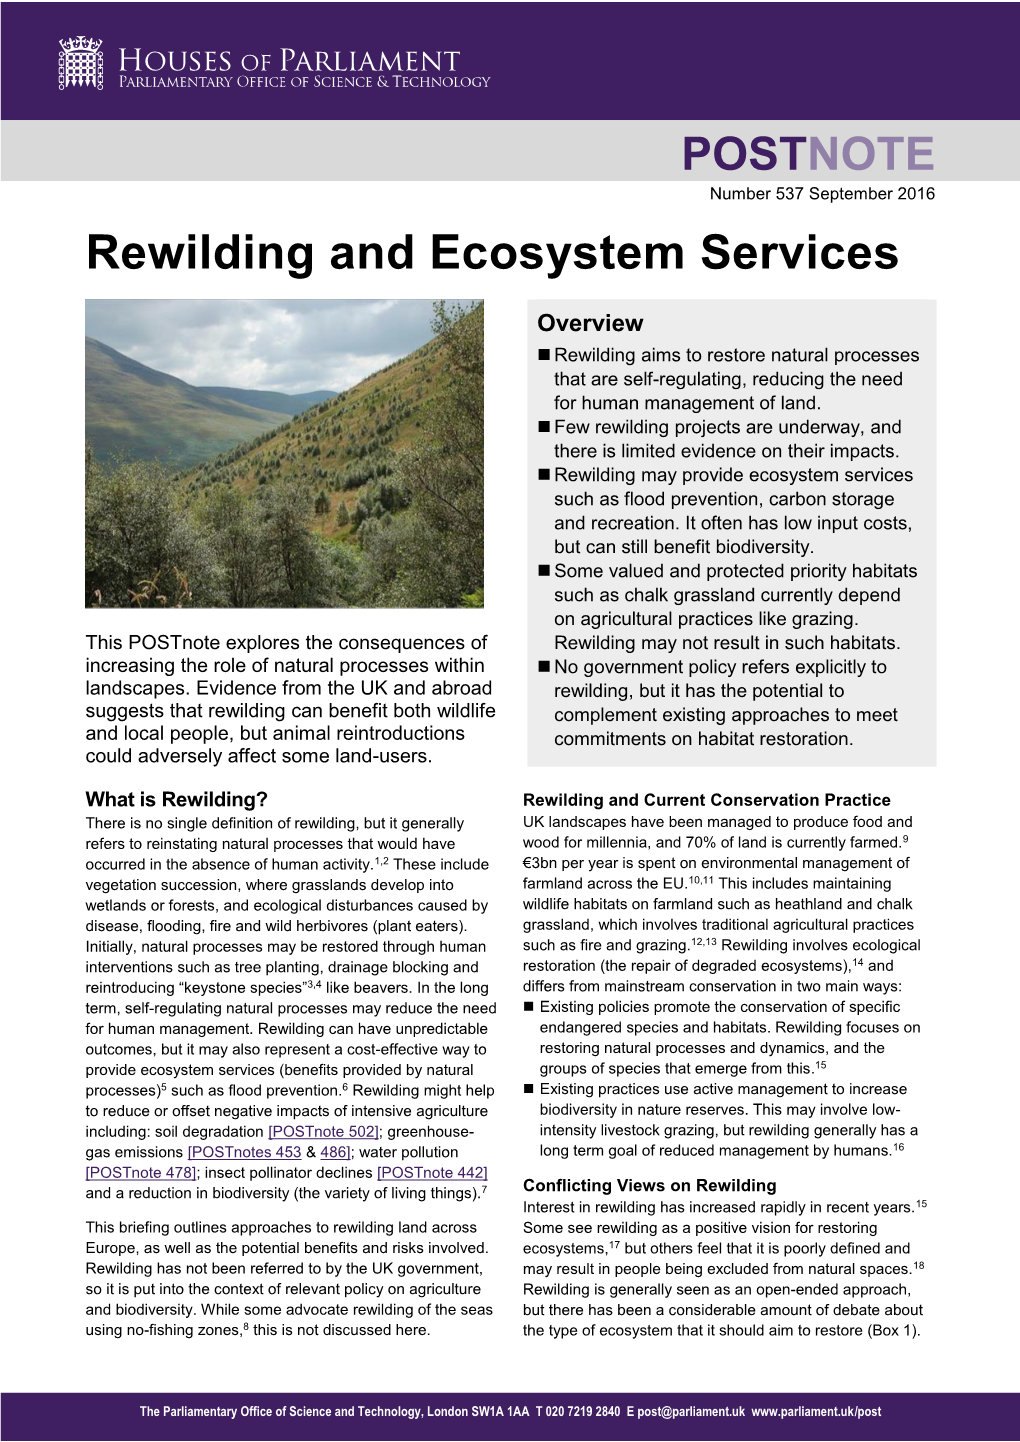 Rewilding and Ecosystem Services